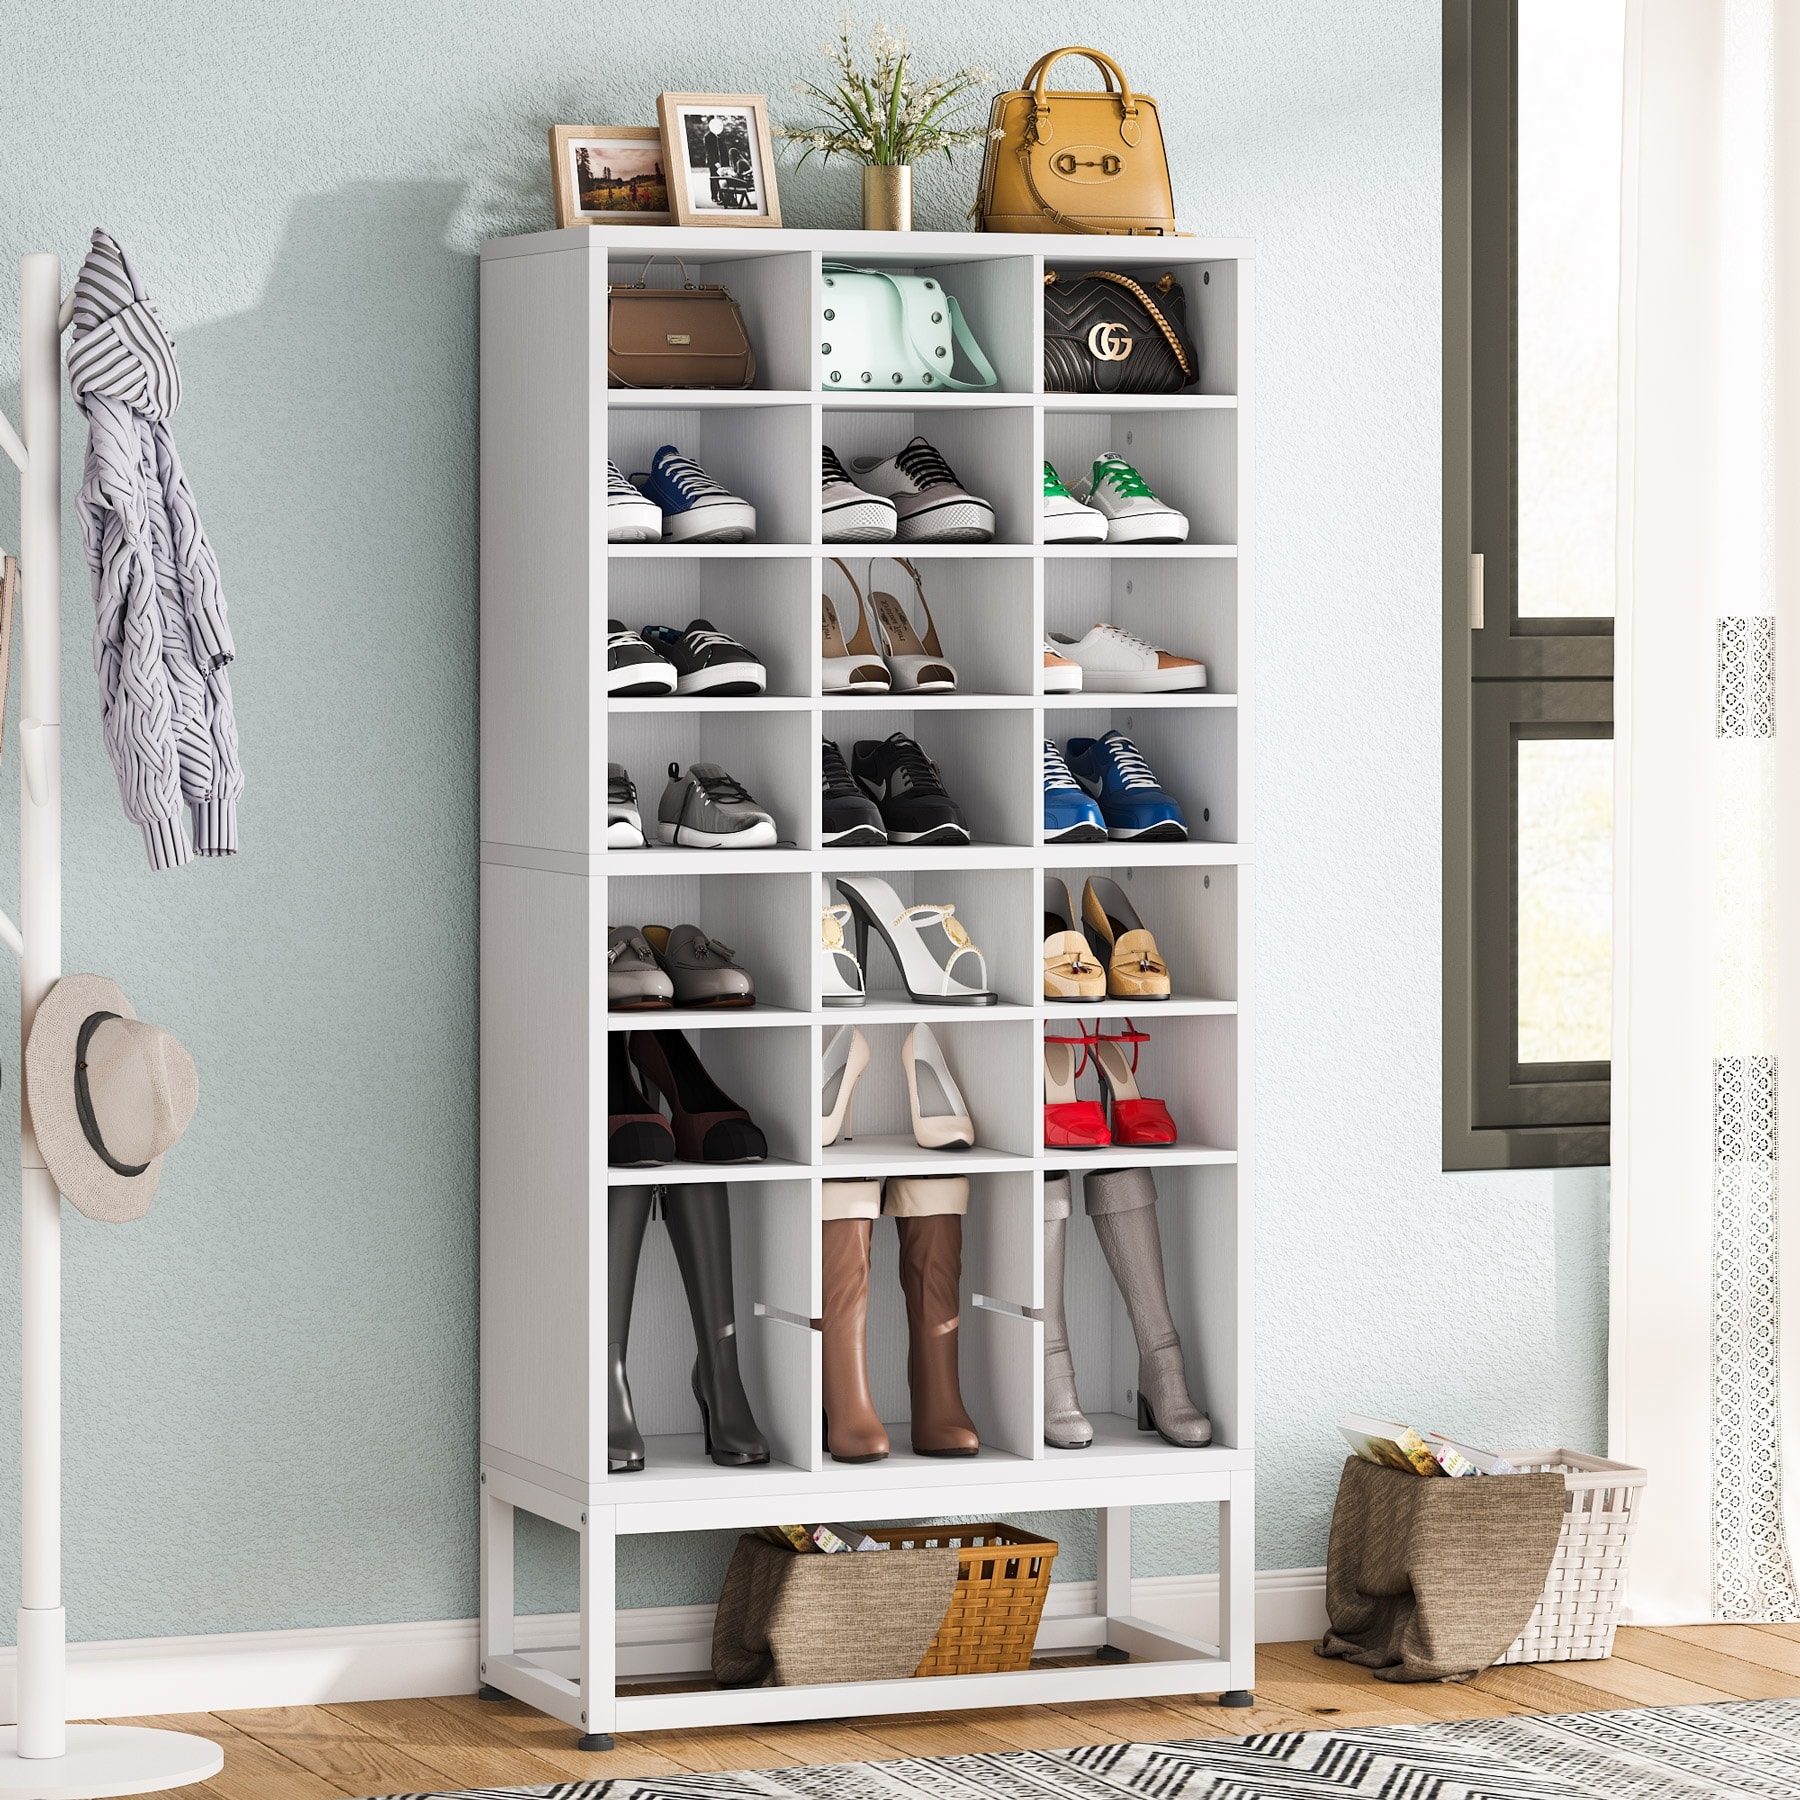 https://ak1.ostkcdn.com/images/products/is/images/direct/7d2c92db442f635089171adf0d032f3459a23683/White-24-Pair-Shoe-Storage-Cabinet%2C-8-Tier-Feestanding-Cube-Shoe-Rack-Closet-Organizers-for-Bedroom%2C-Hallway.jpg